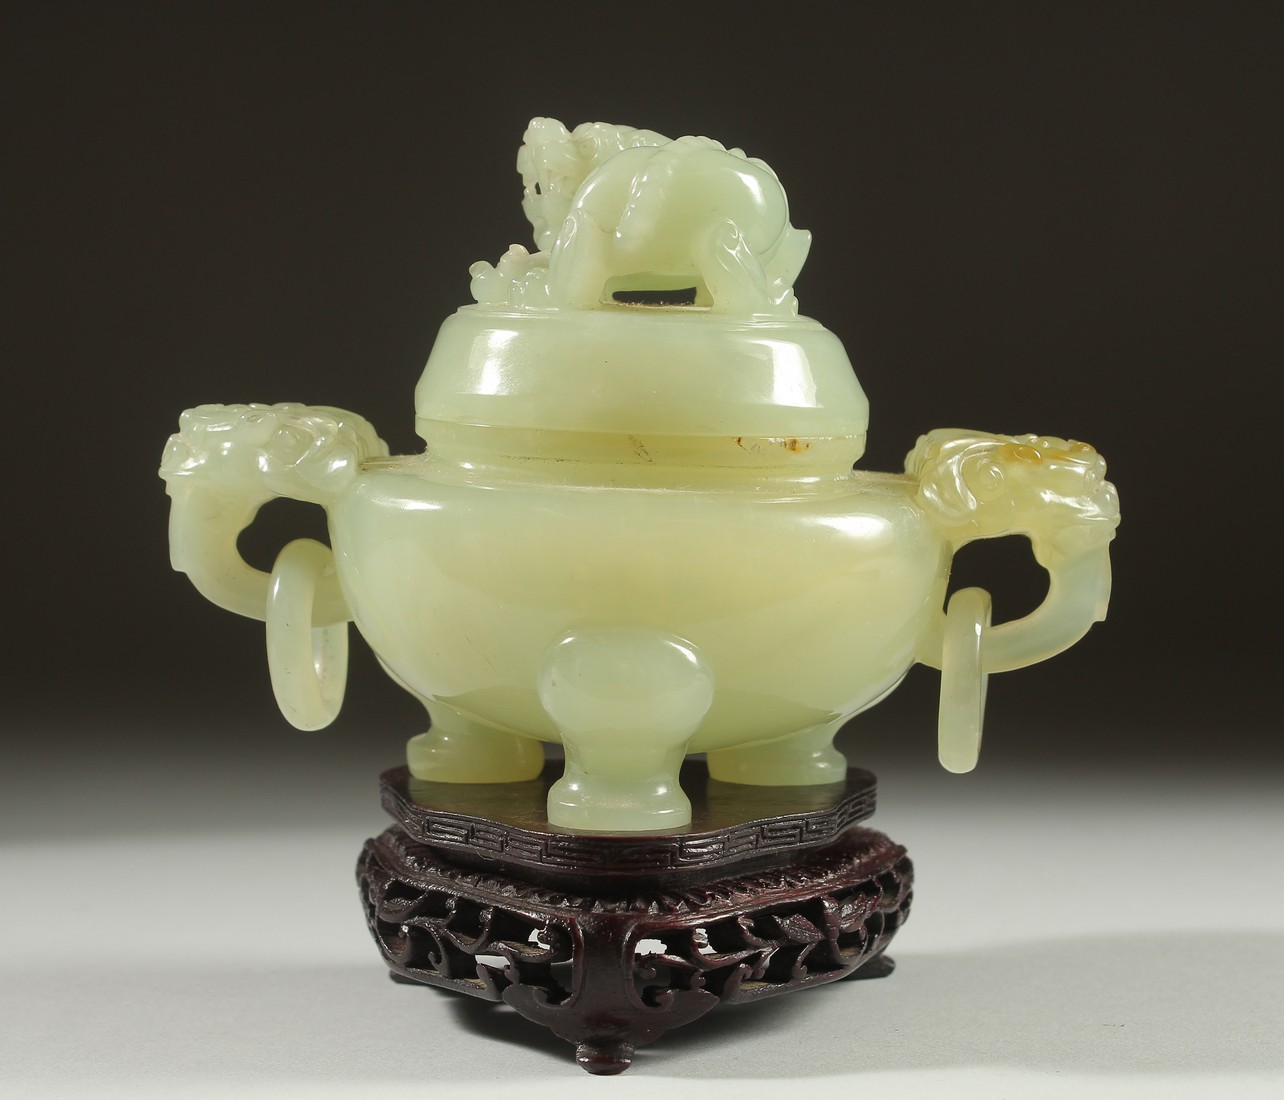 A CARVED JADE KORO AND COVER on a fitted wooden stand, with drop ring twin handles and carved foo